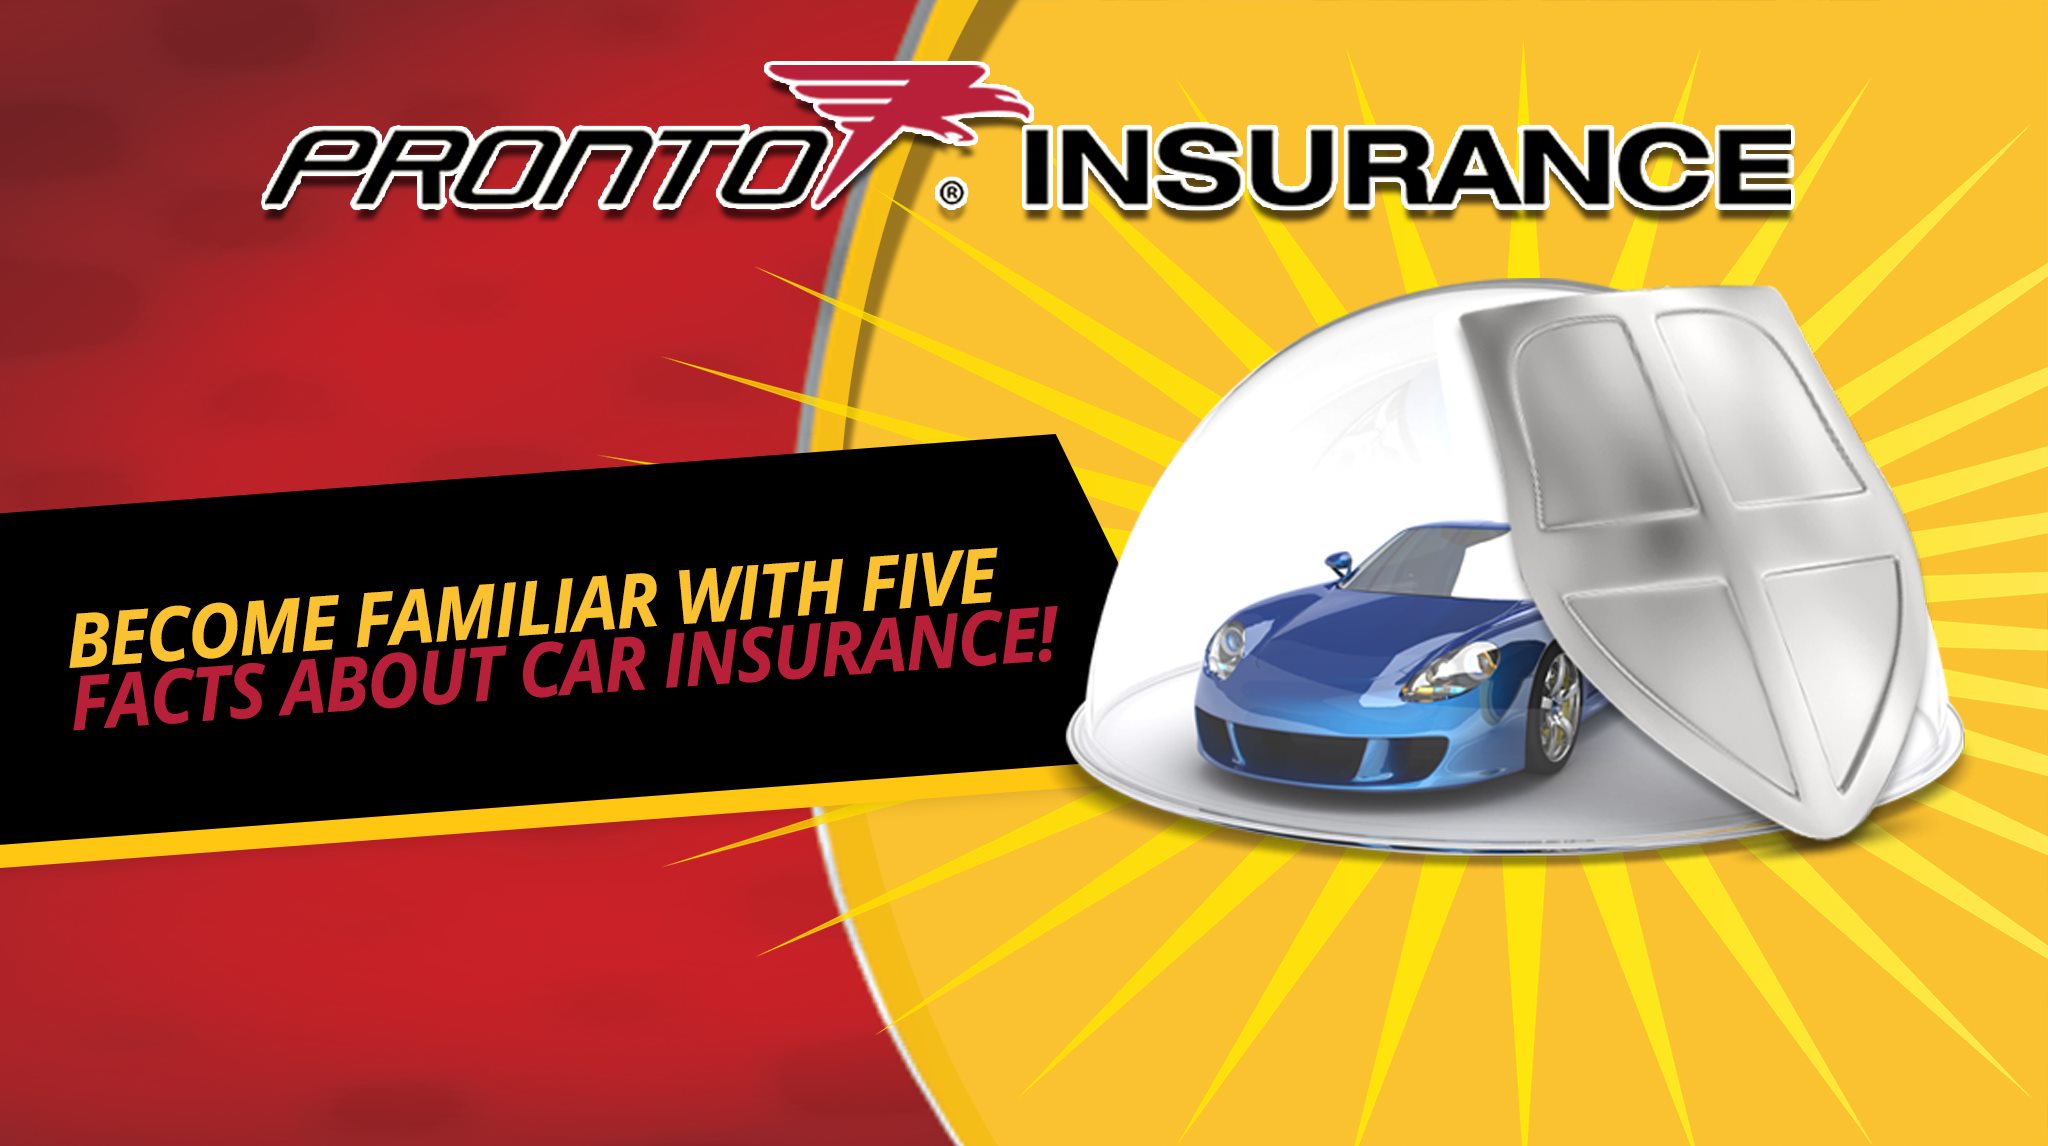 Become Familiar with Five Facts About Car Insurance!